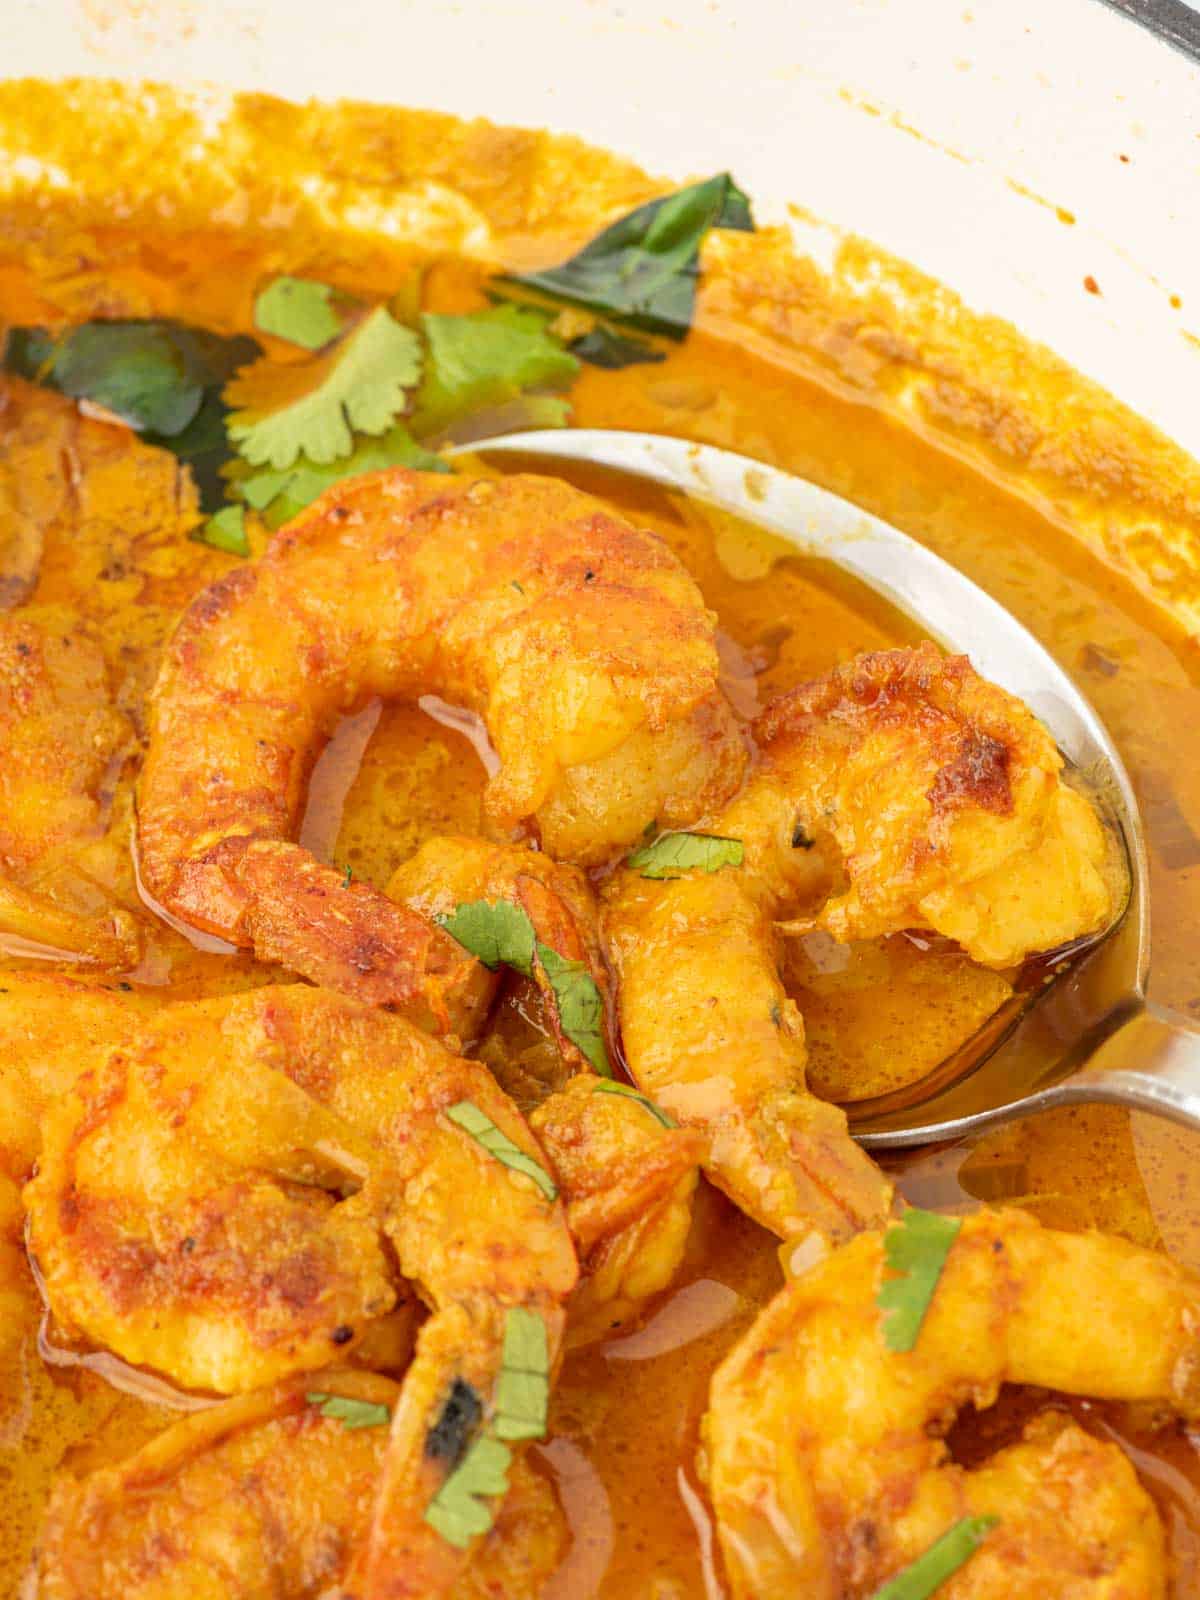 A spoon lifts two pieces of shrimp from a pot of red curry sauce.